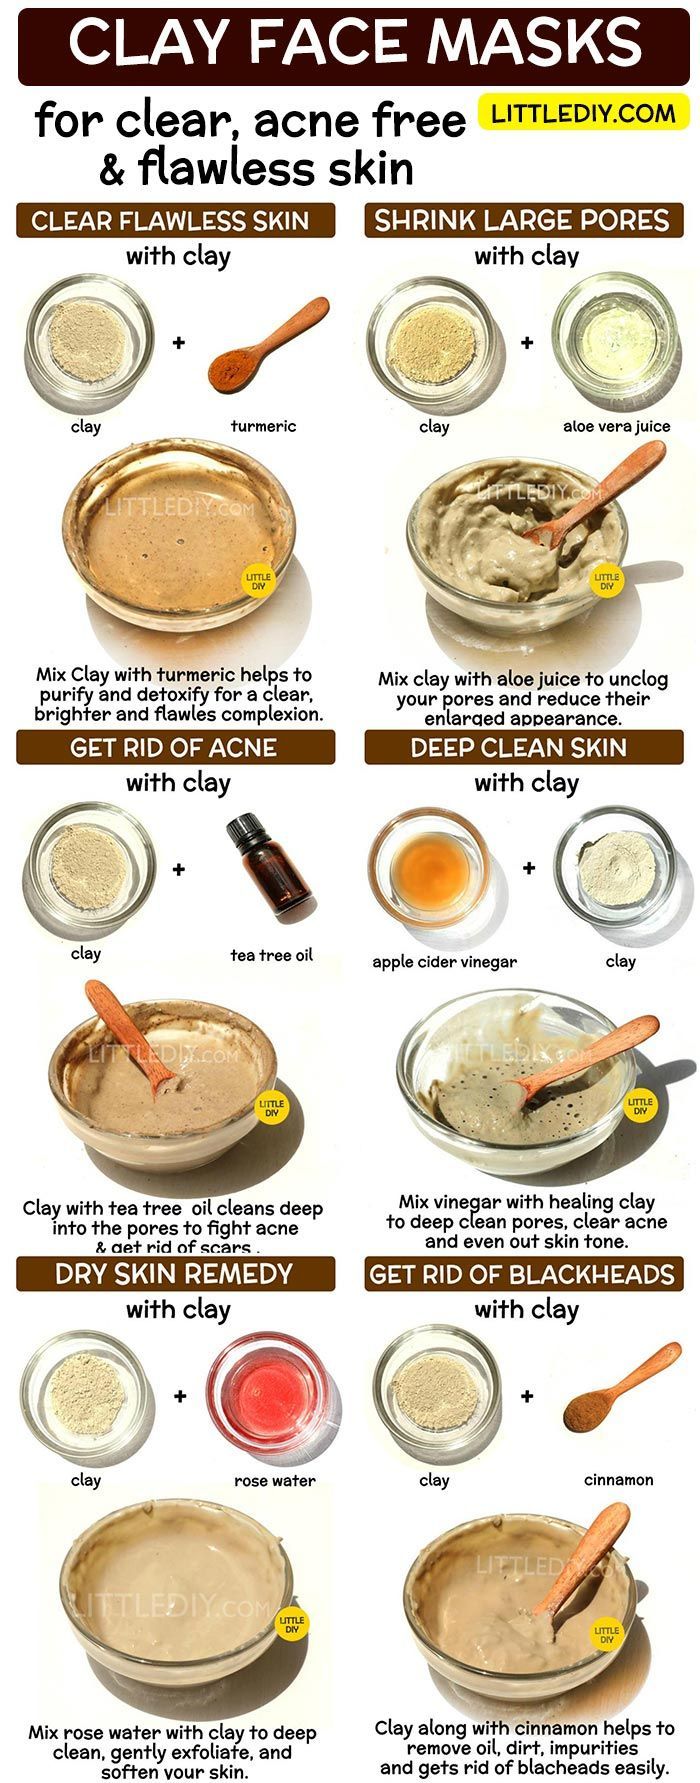 CLAY FACE MASK FOR CLEAR, ACNE FREE AND FLAWLESS SKIN - LITTLE DIY - CLAY FACE MASK FOR CLEAR, ACNE FREE AND FLAWLESS SKIN - LITTLE DIY -   15 beauty Mask ideas